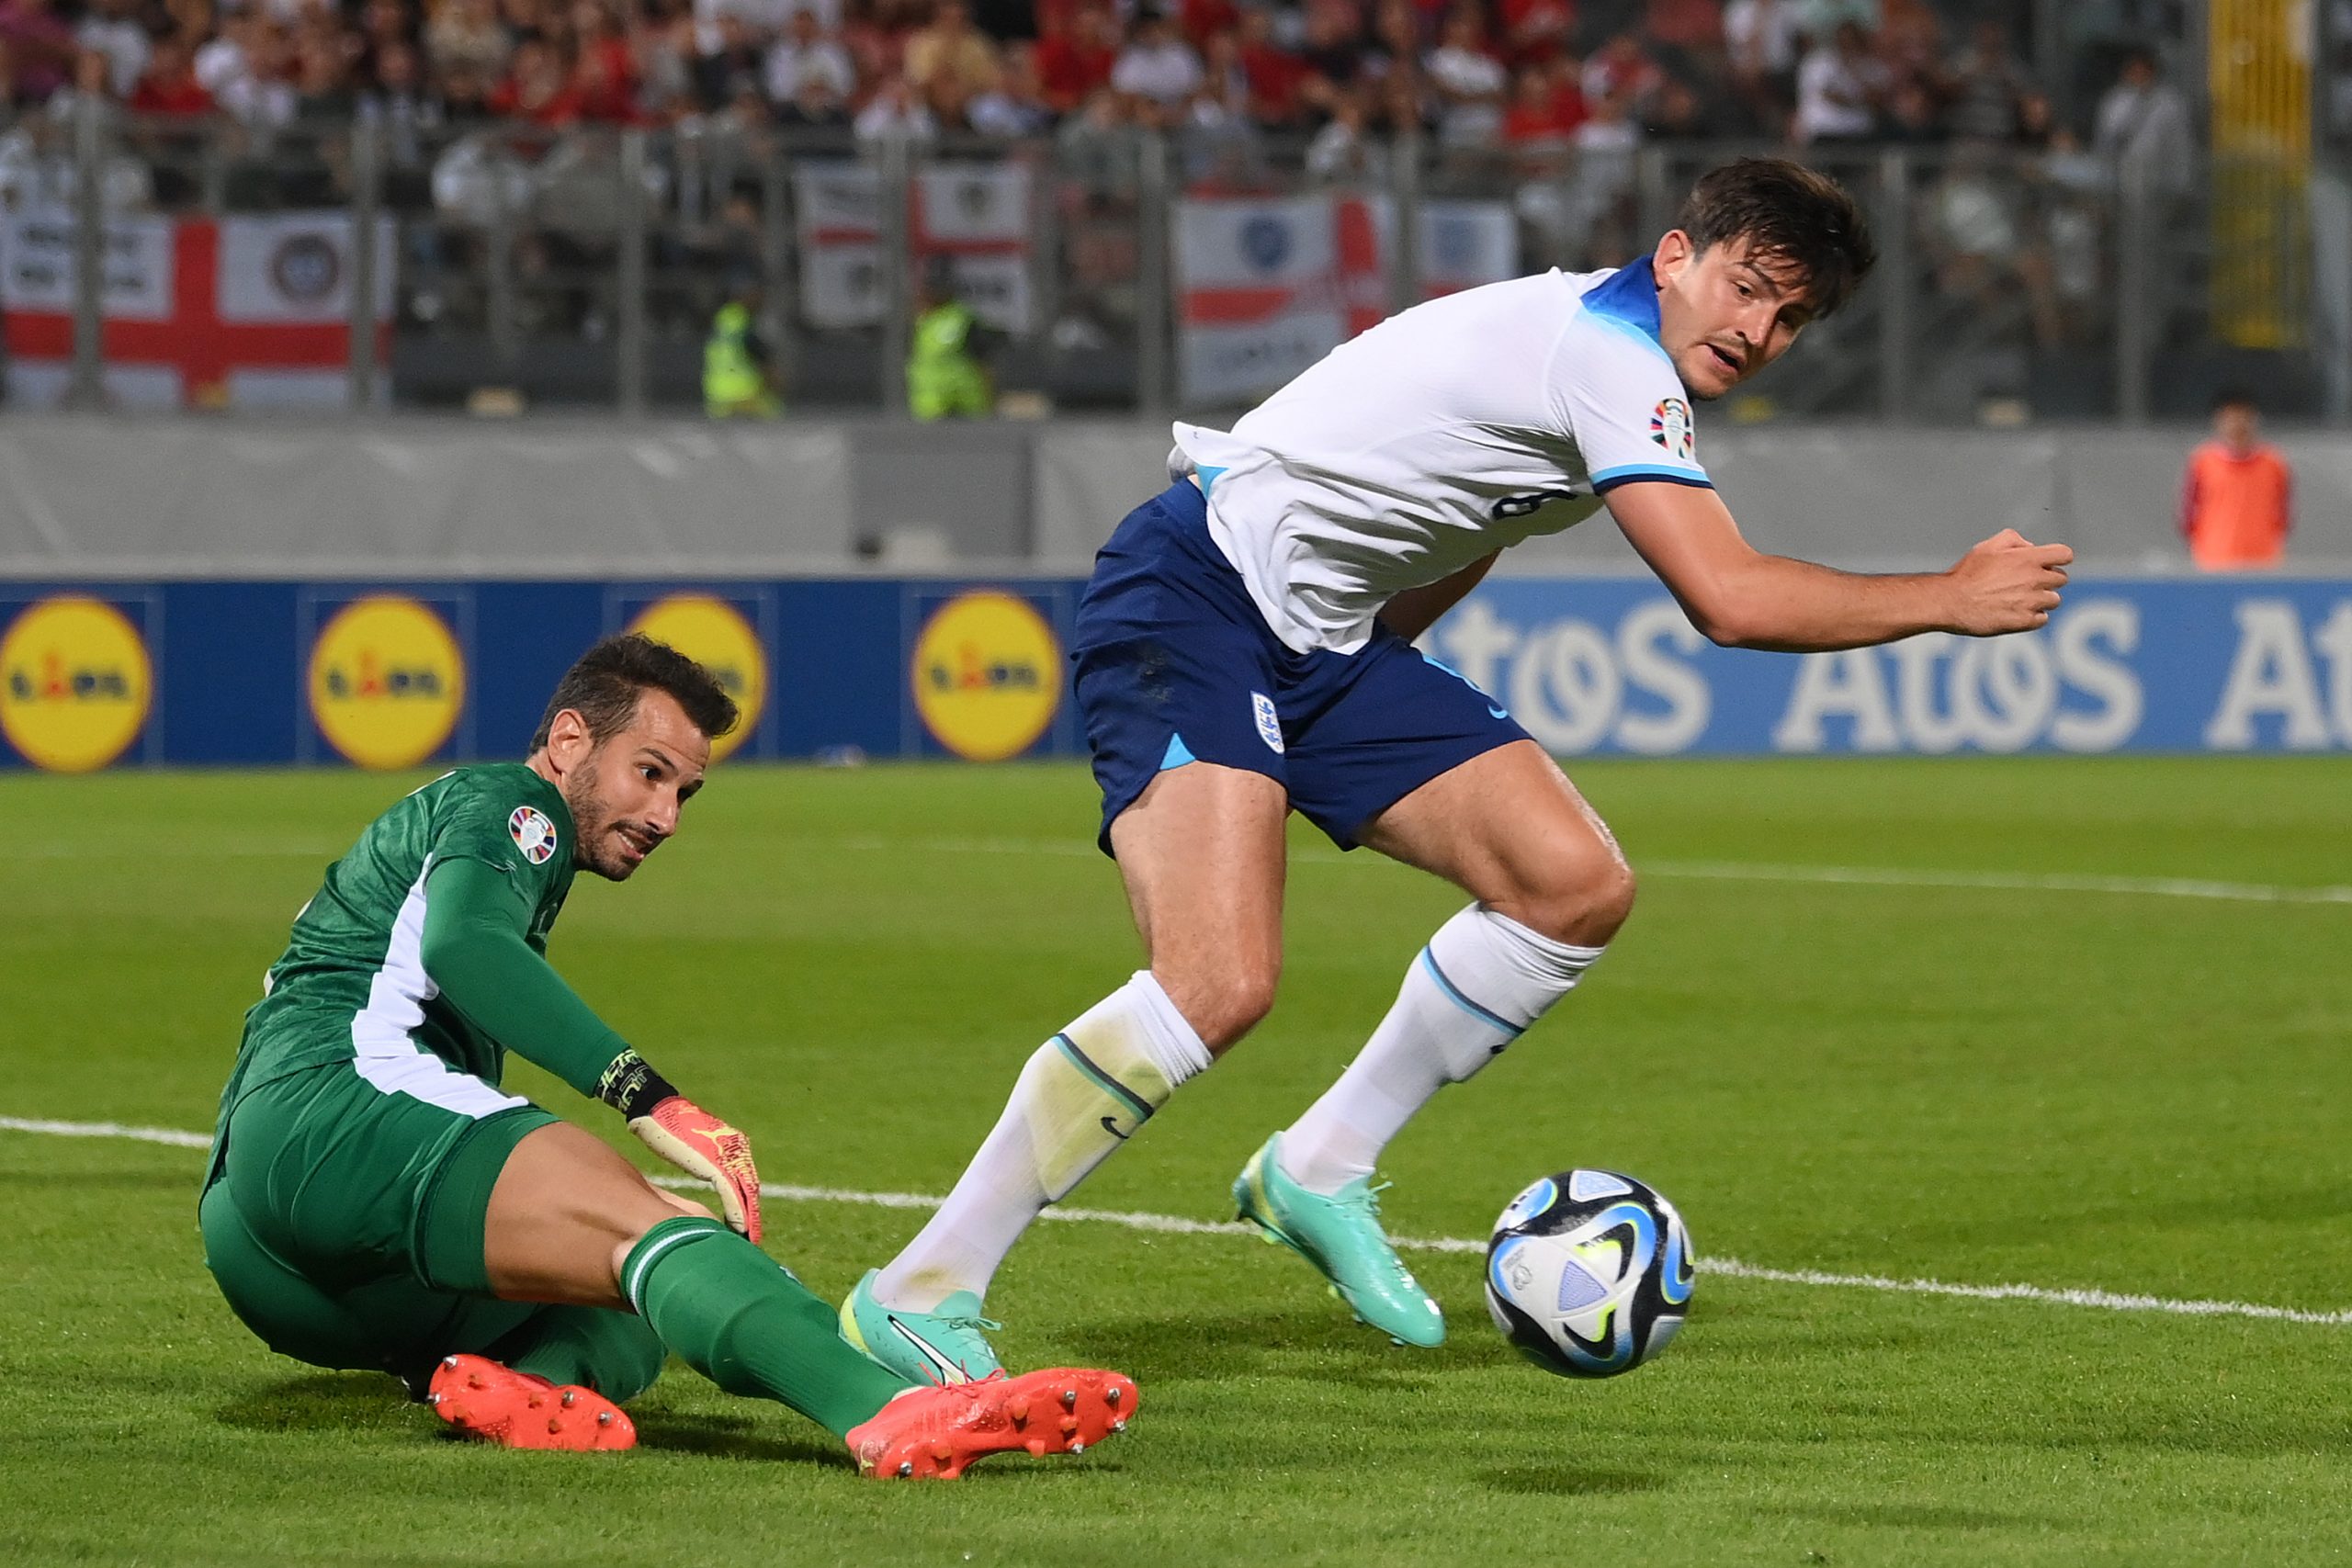 VALLETTA, MALTA - JUNE 16: Harry Maguire of England is challenged by Henry Bonello of Malta during the UEFA EURO 2024 qualifying round group C match between Malta and England at Ta' Qali Stadium on June 16, 2023 in Valletta, Malta. (Photo by Mike Hewitt/Getty Images)